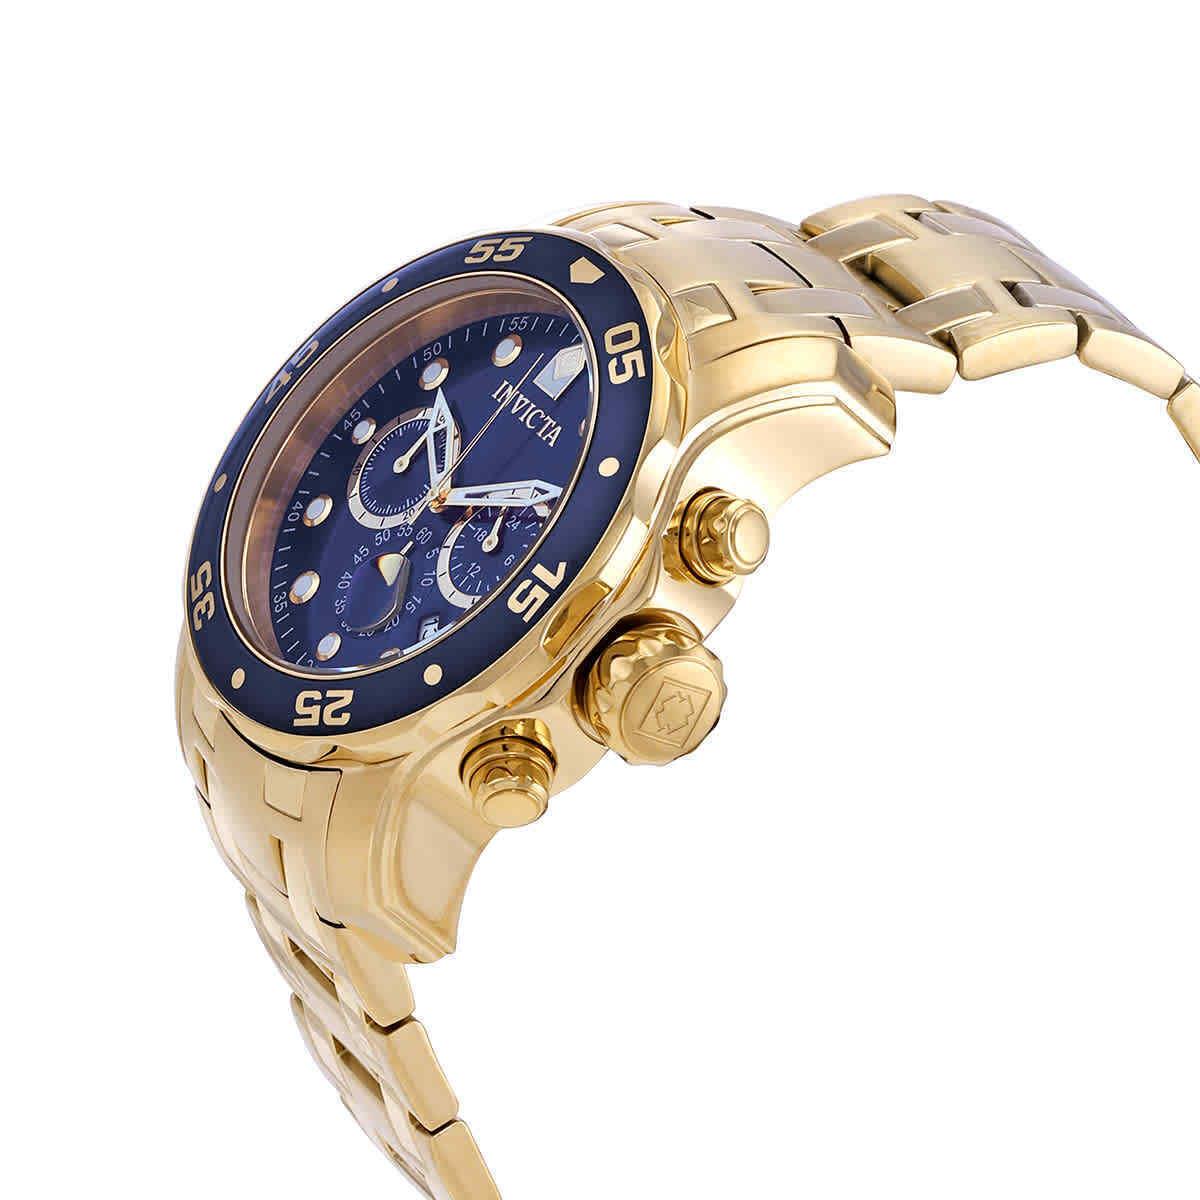 Invicta Pro Diver Chronograph Blue Dial 18kt Gold-plated Men`s Watch 0073 - Dial: Blue, Band: Gold, Bezel: Gold, Blue